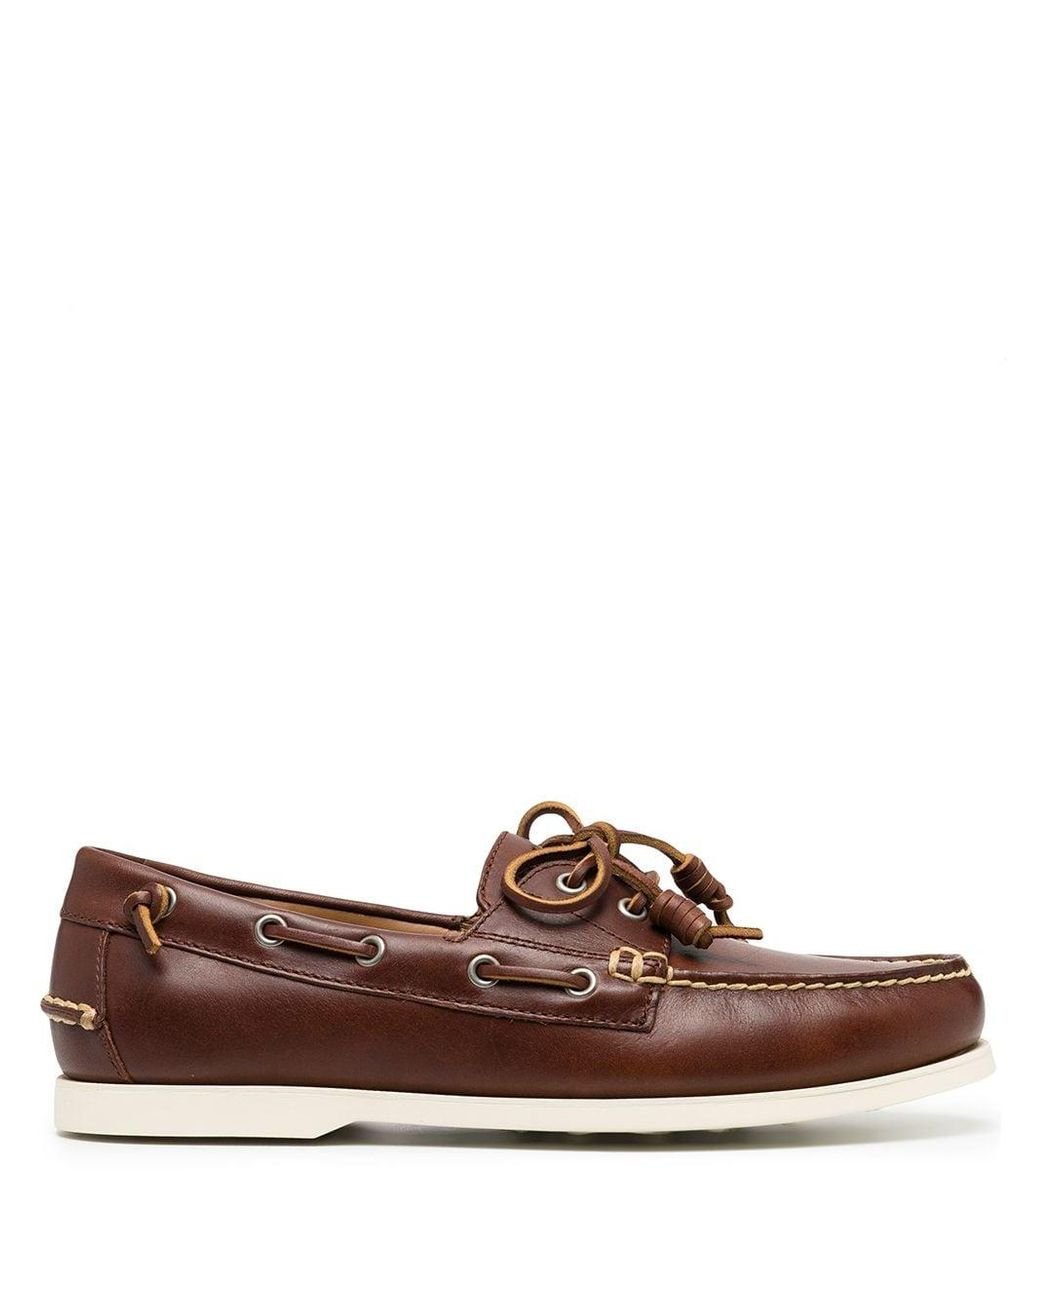 Polo Ralph Lauren Leather Merton Lace-up Loafers in Brown for Men - Lyst